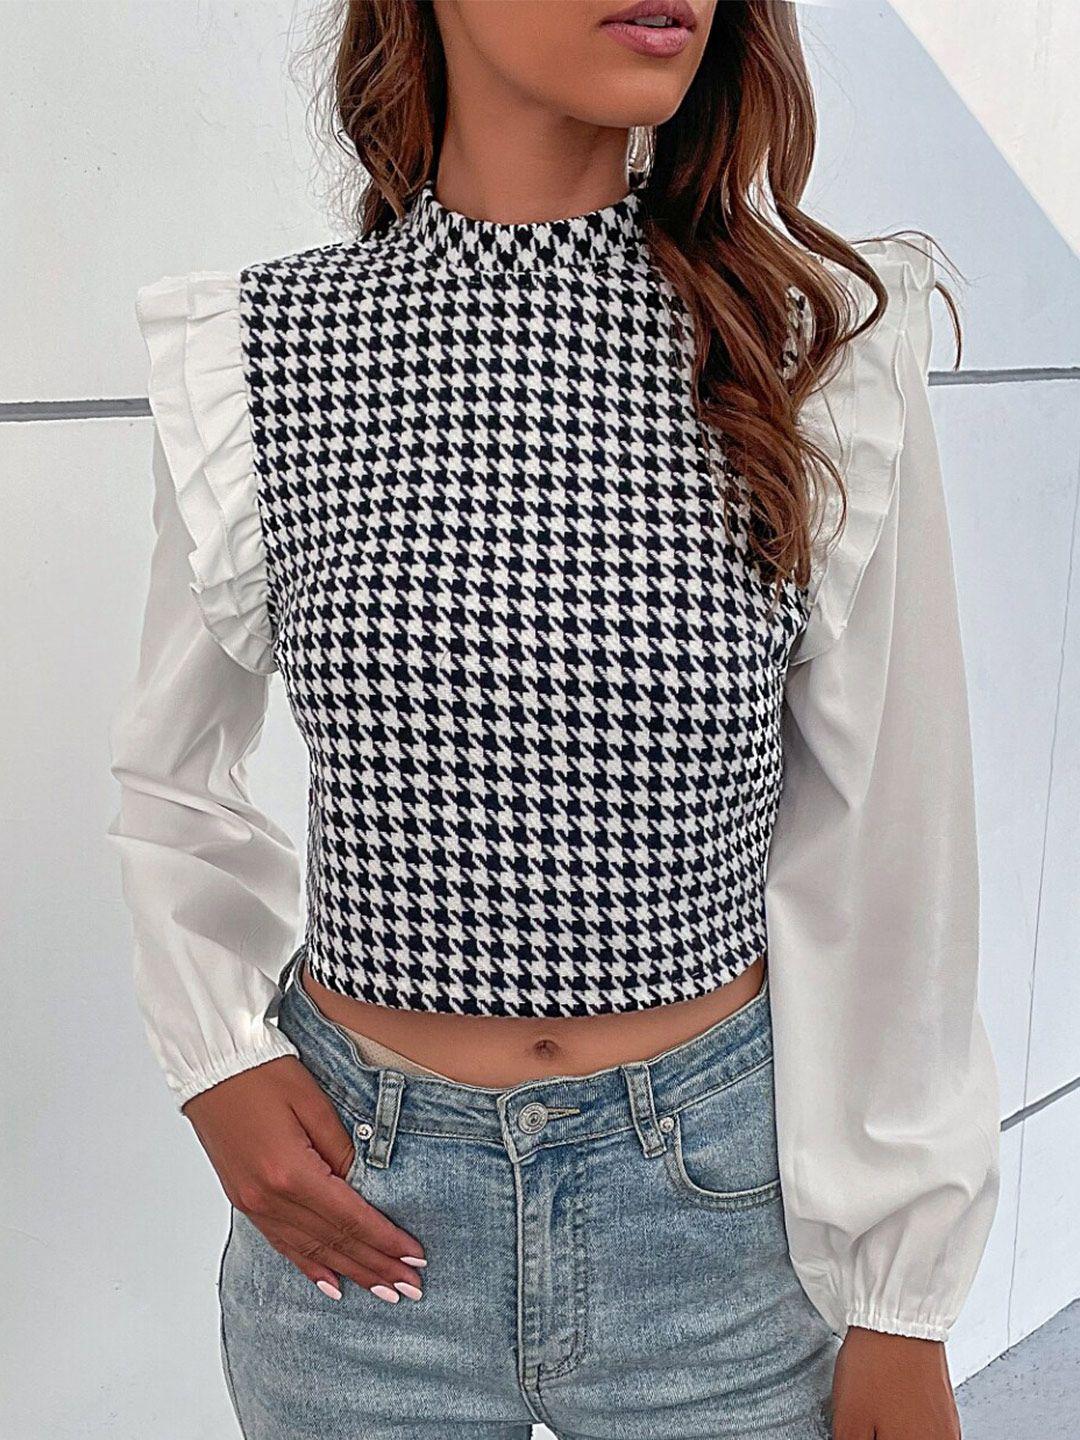 stylecast checked cuffed sleeve crop top